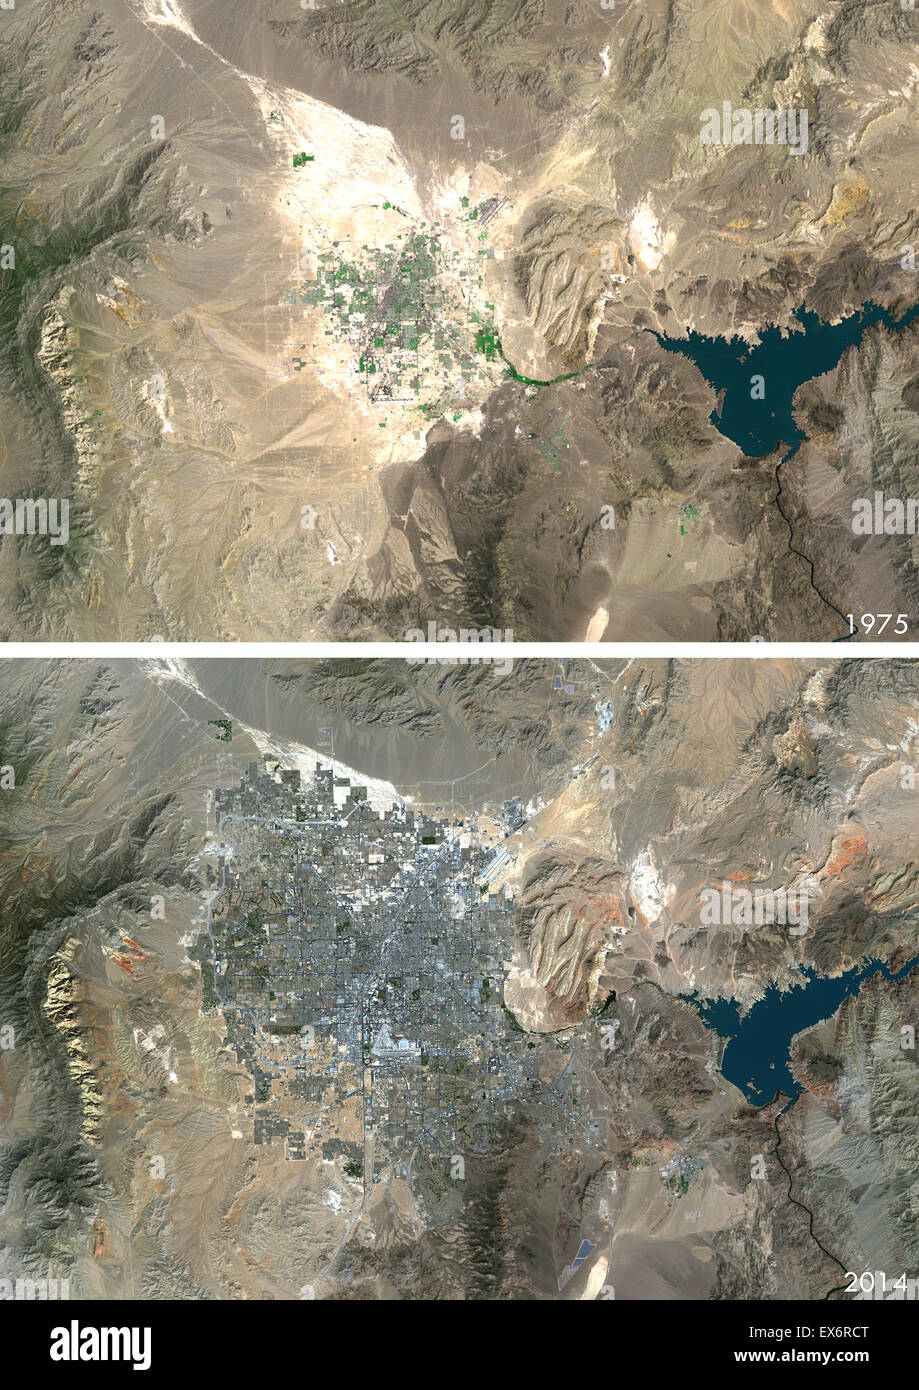 Satellite view of Las Vegas, Nevada, USA in 1975 and 2013. This before and  after image shows urban expansion over the years Stock Photo - Alamy